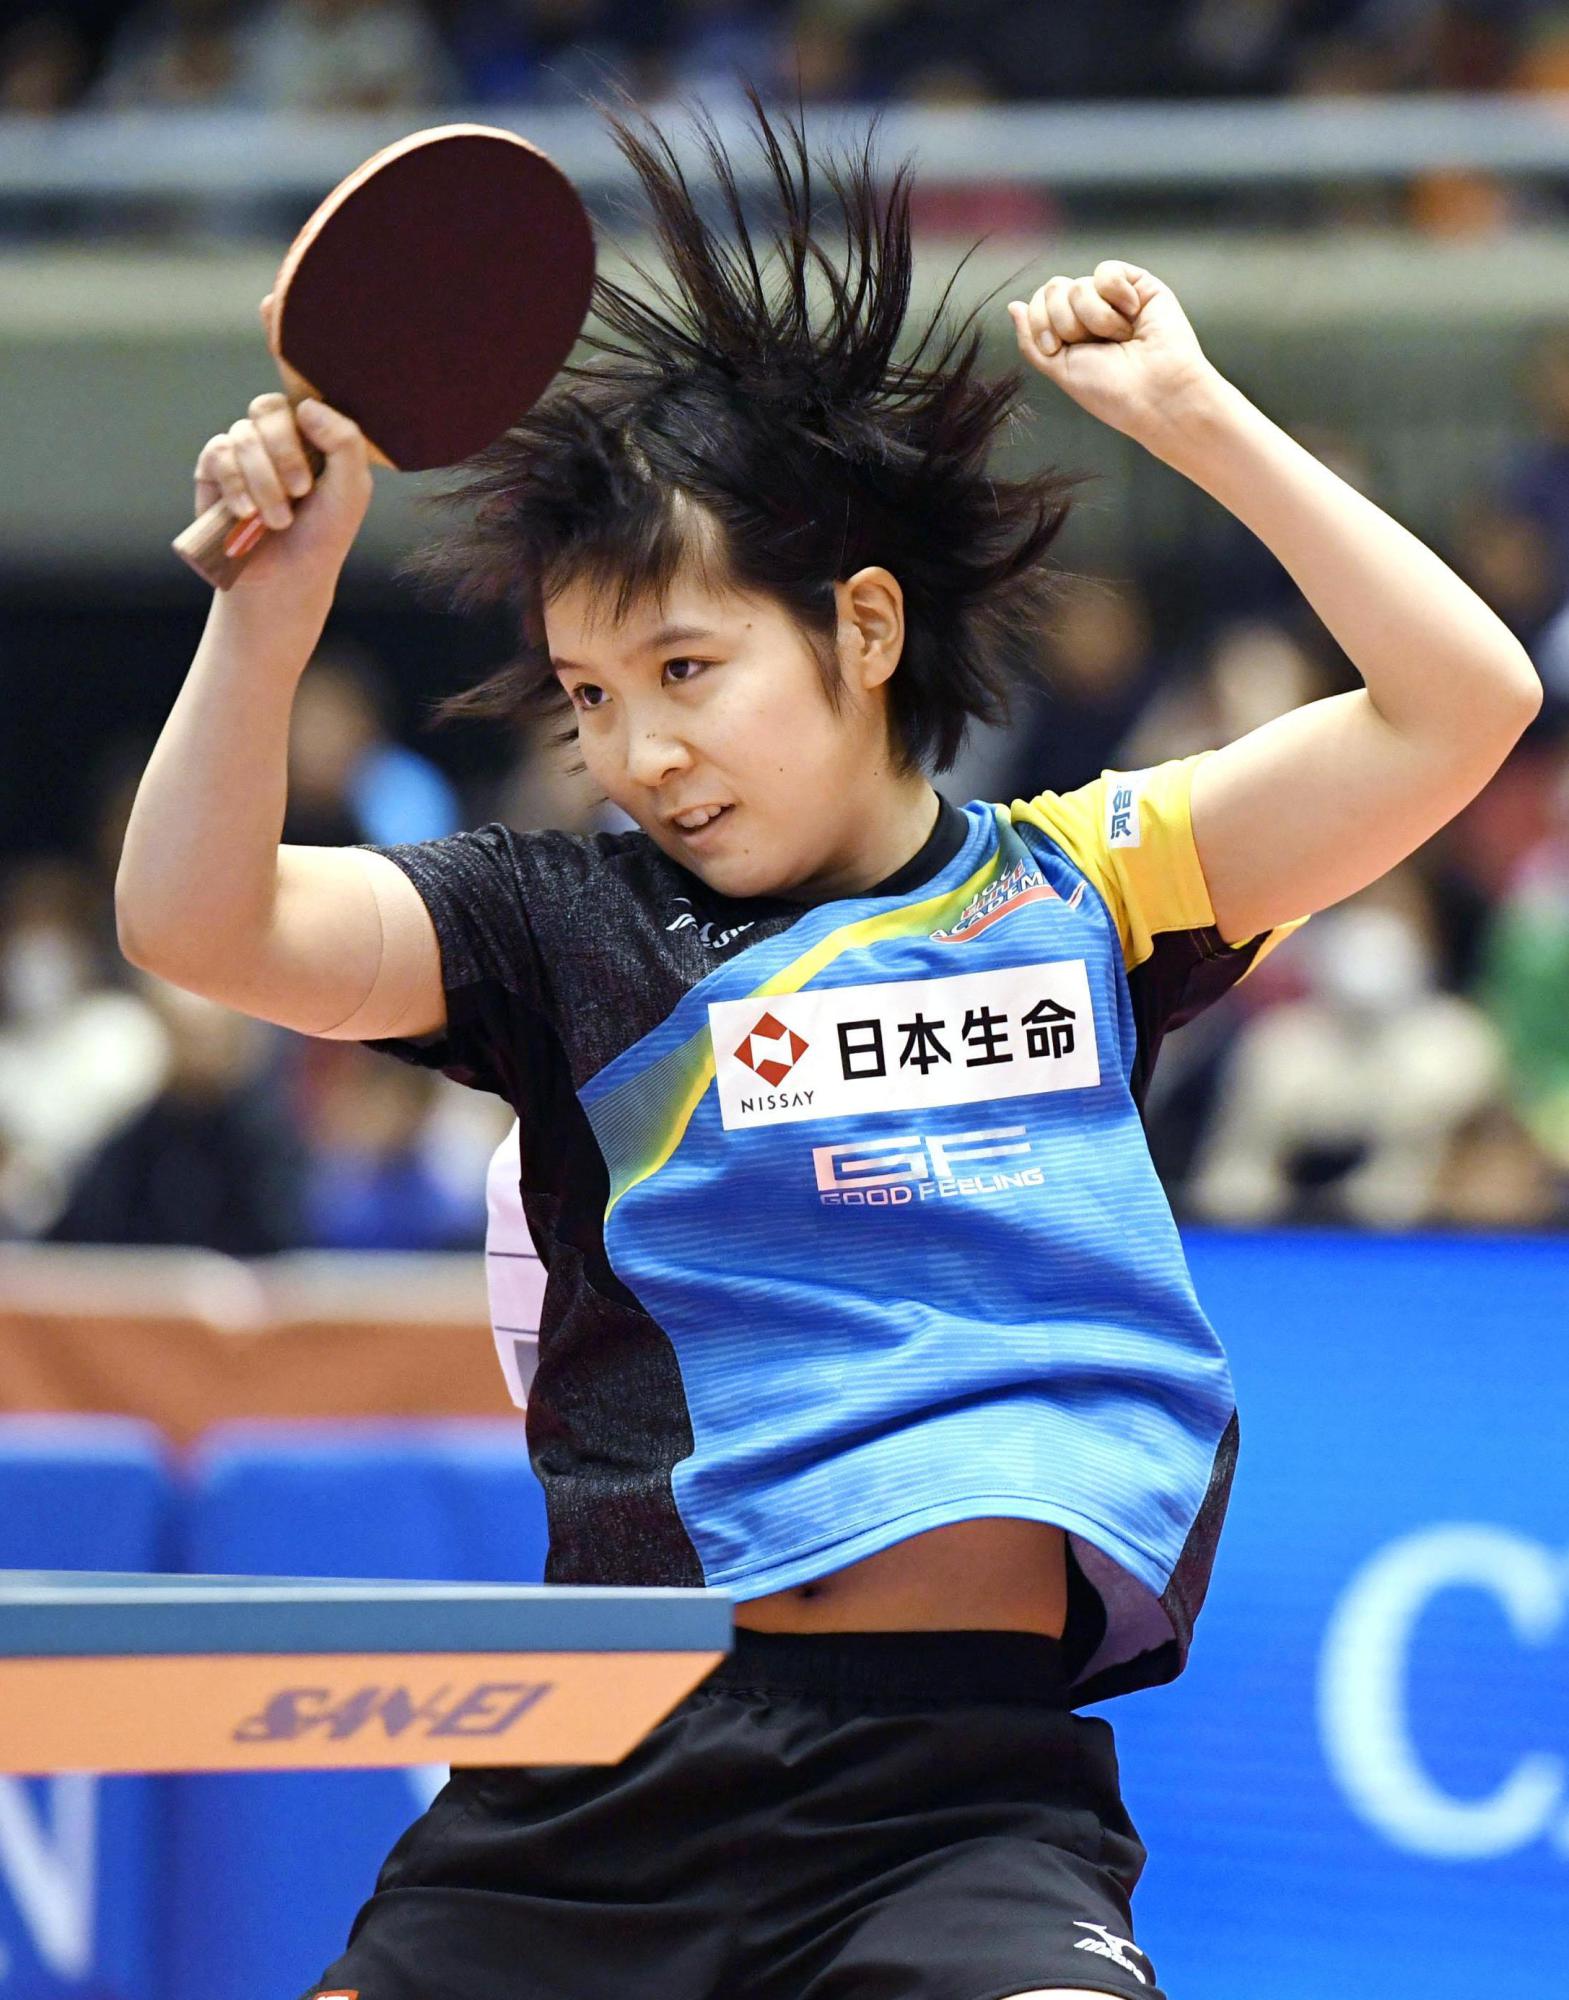 Teen Hirano captures national table tennis title | The Japan Times1569 x 2000